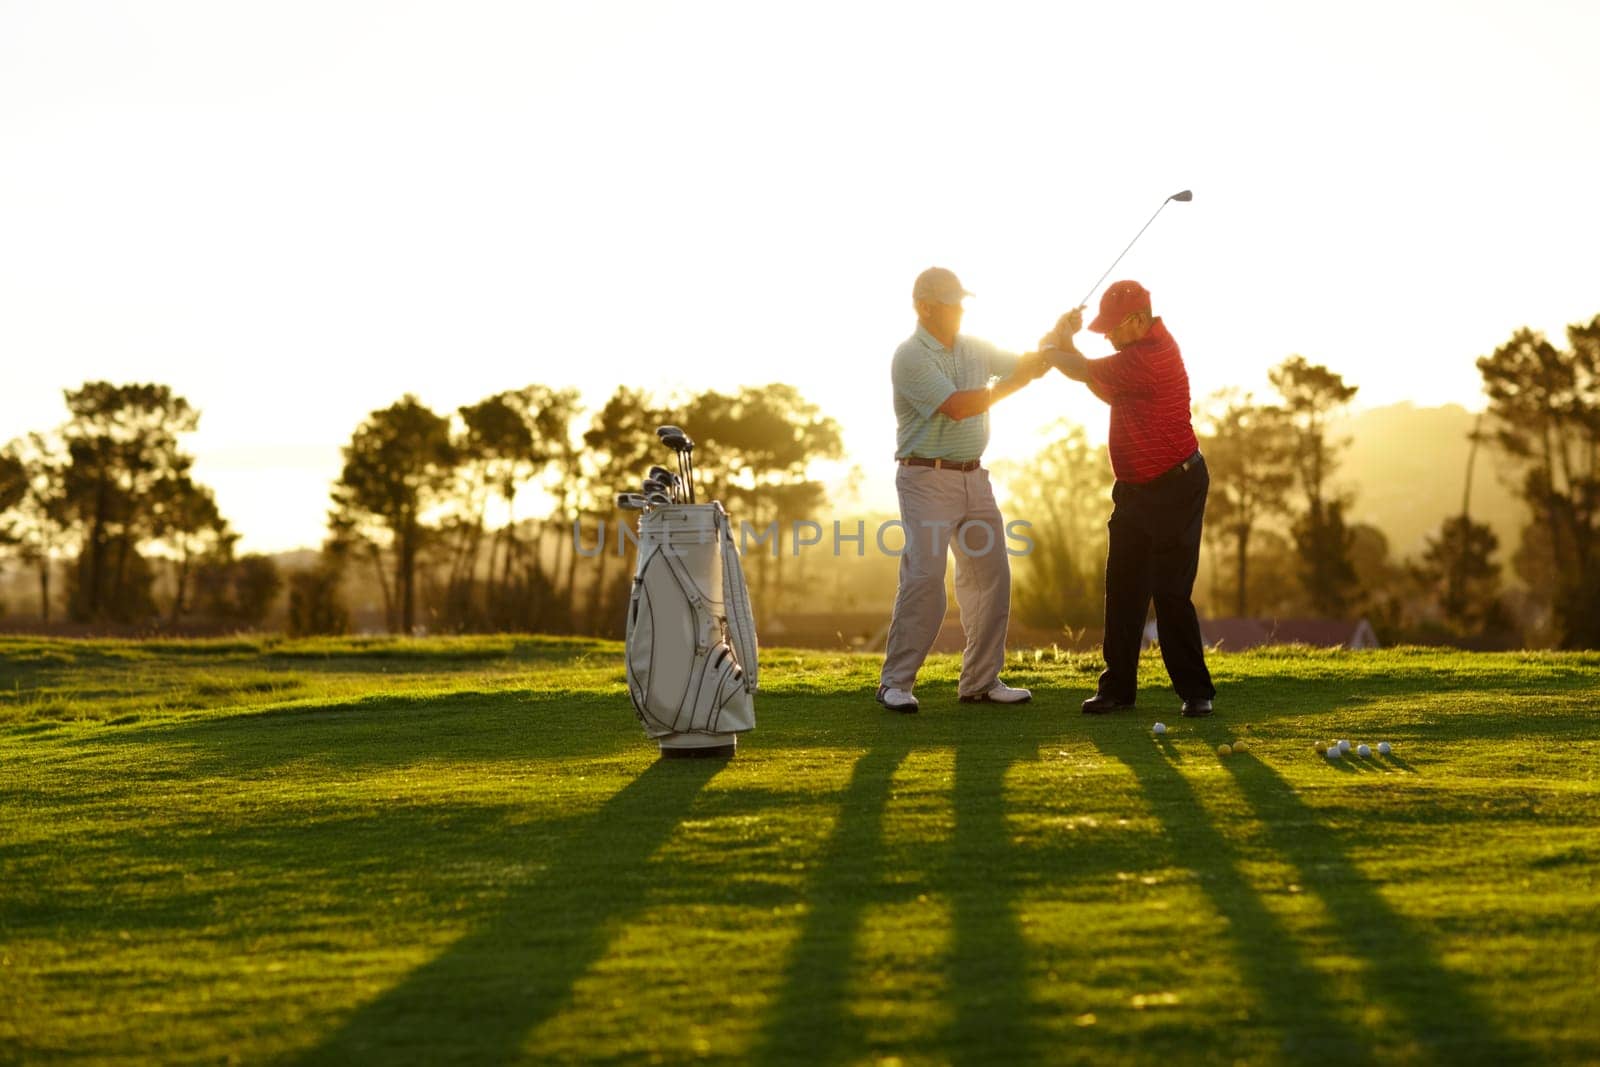 Trainer, golf course or man with help, teaching or fitness with training, lesson or skills. Male person, player or coach with golfer, advice or sports with professional, physical activity or exercise.